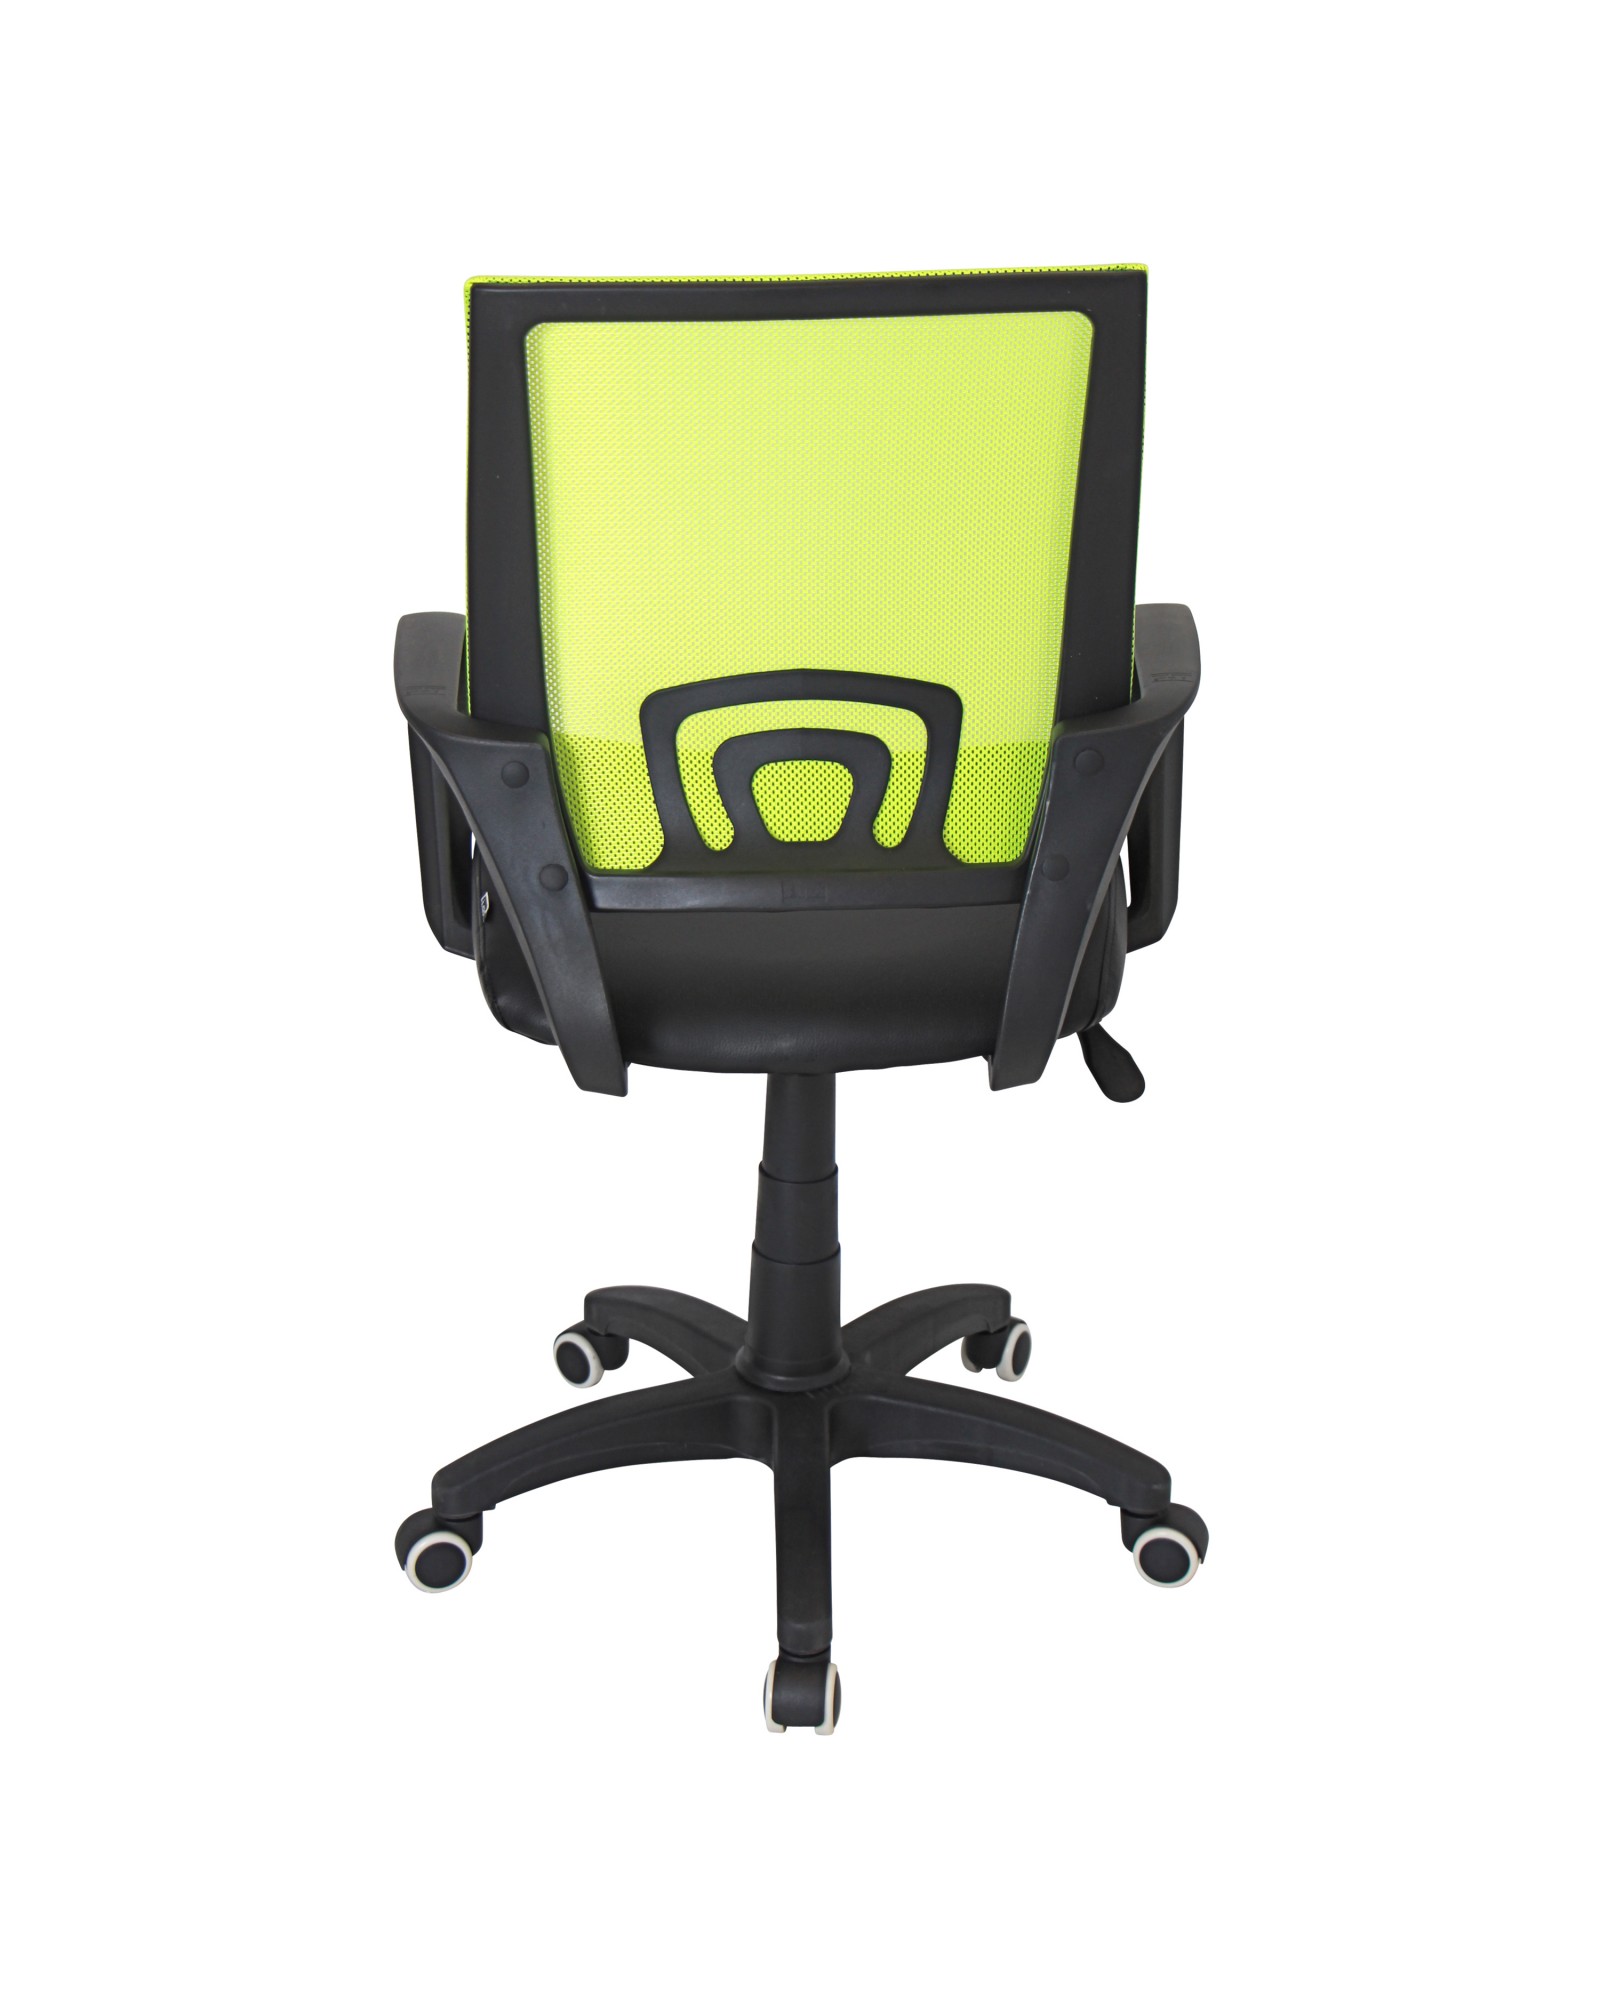 Officer Modern Adjustable Office Chair with Swivel in Lime Green